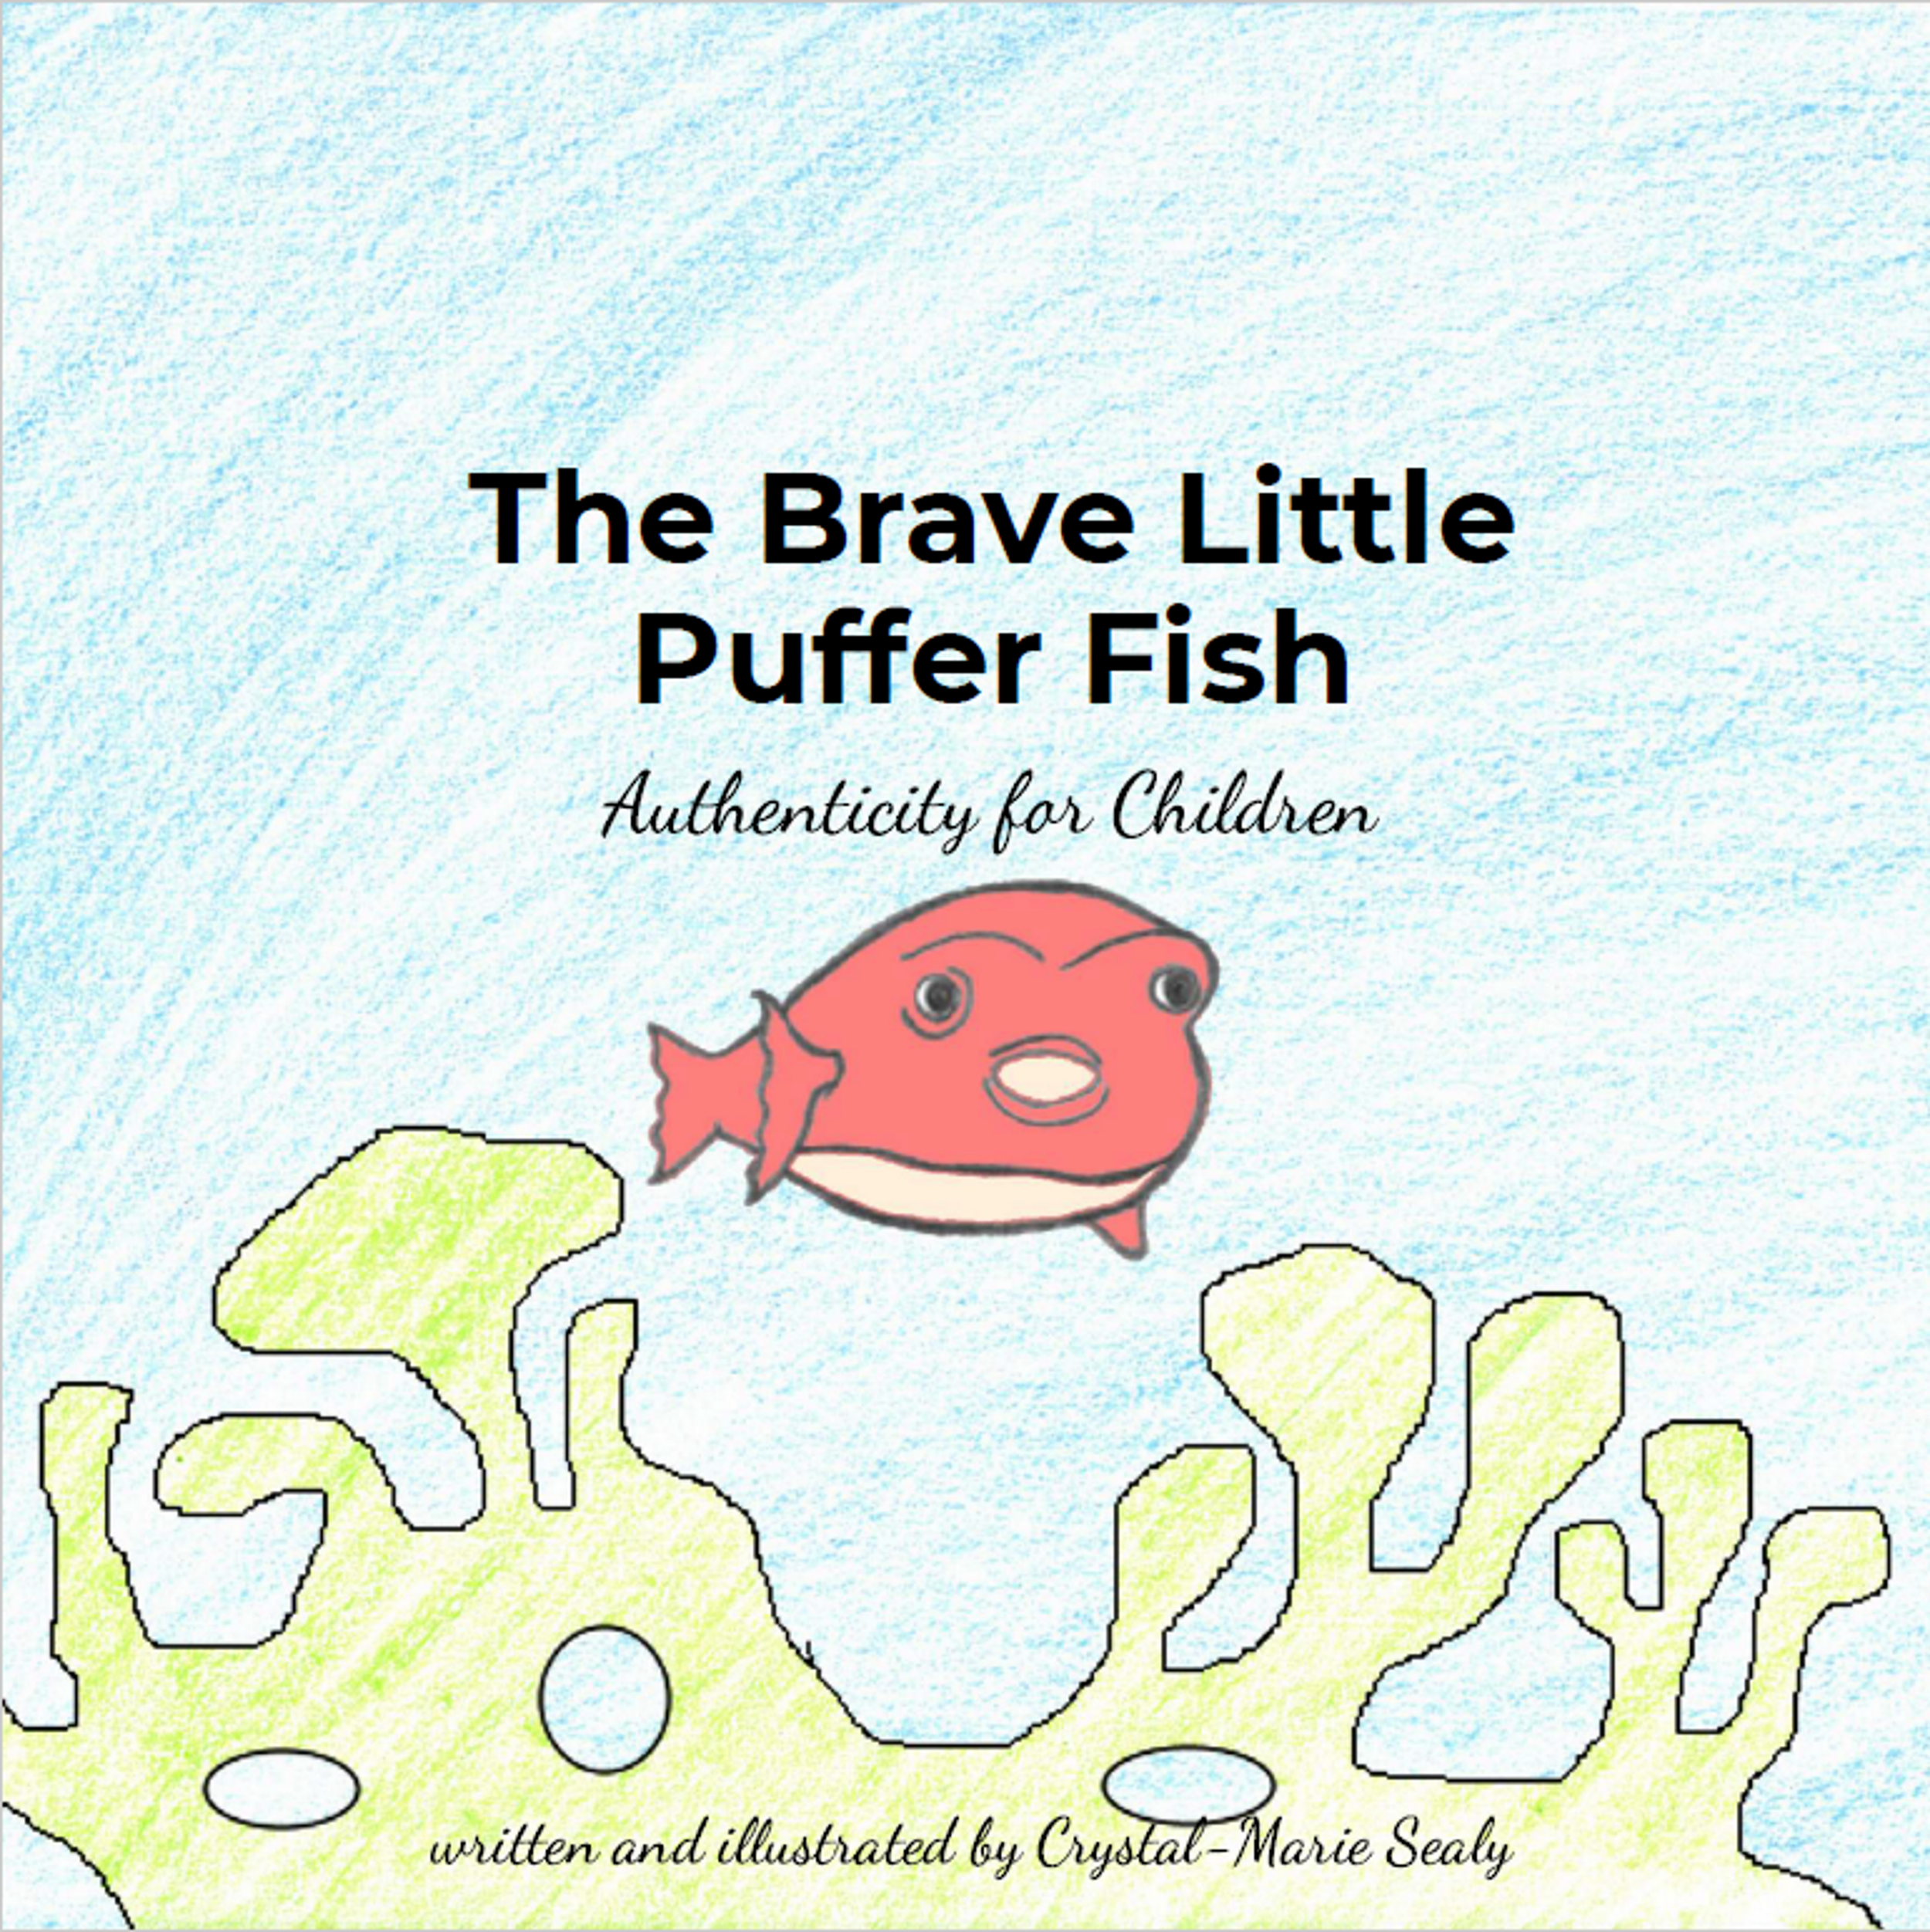 The Brave Little Puffer Fish: Authenticity for Children